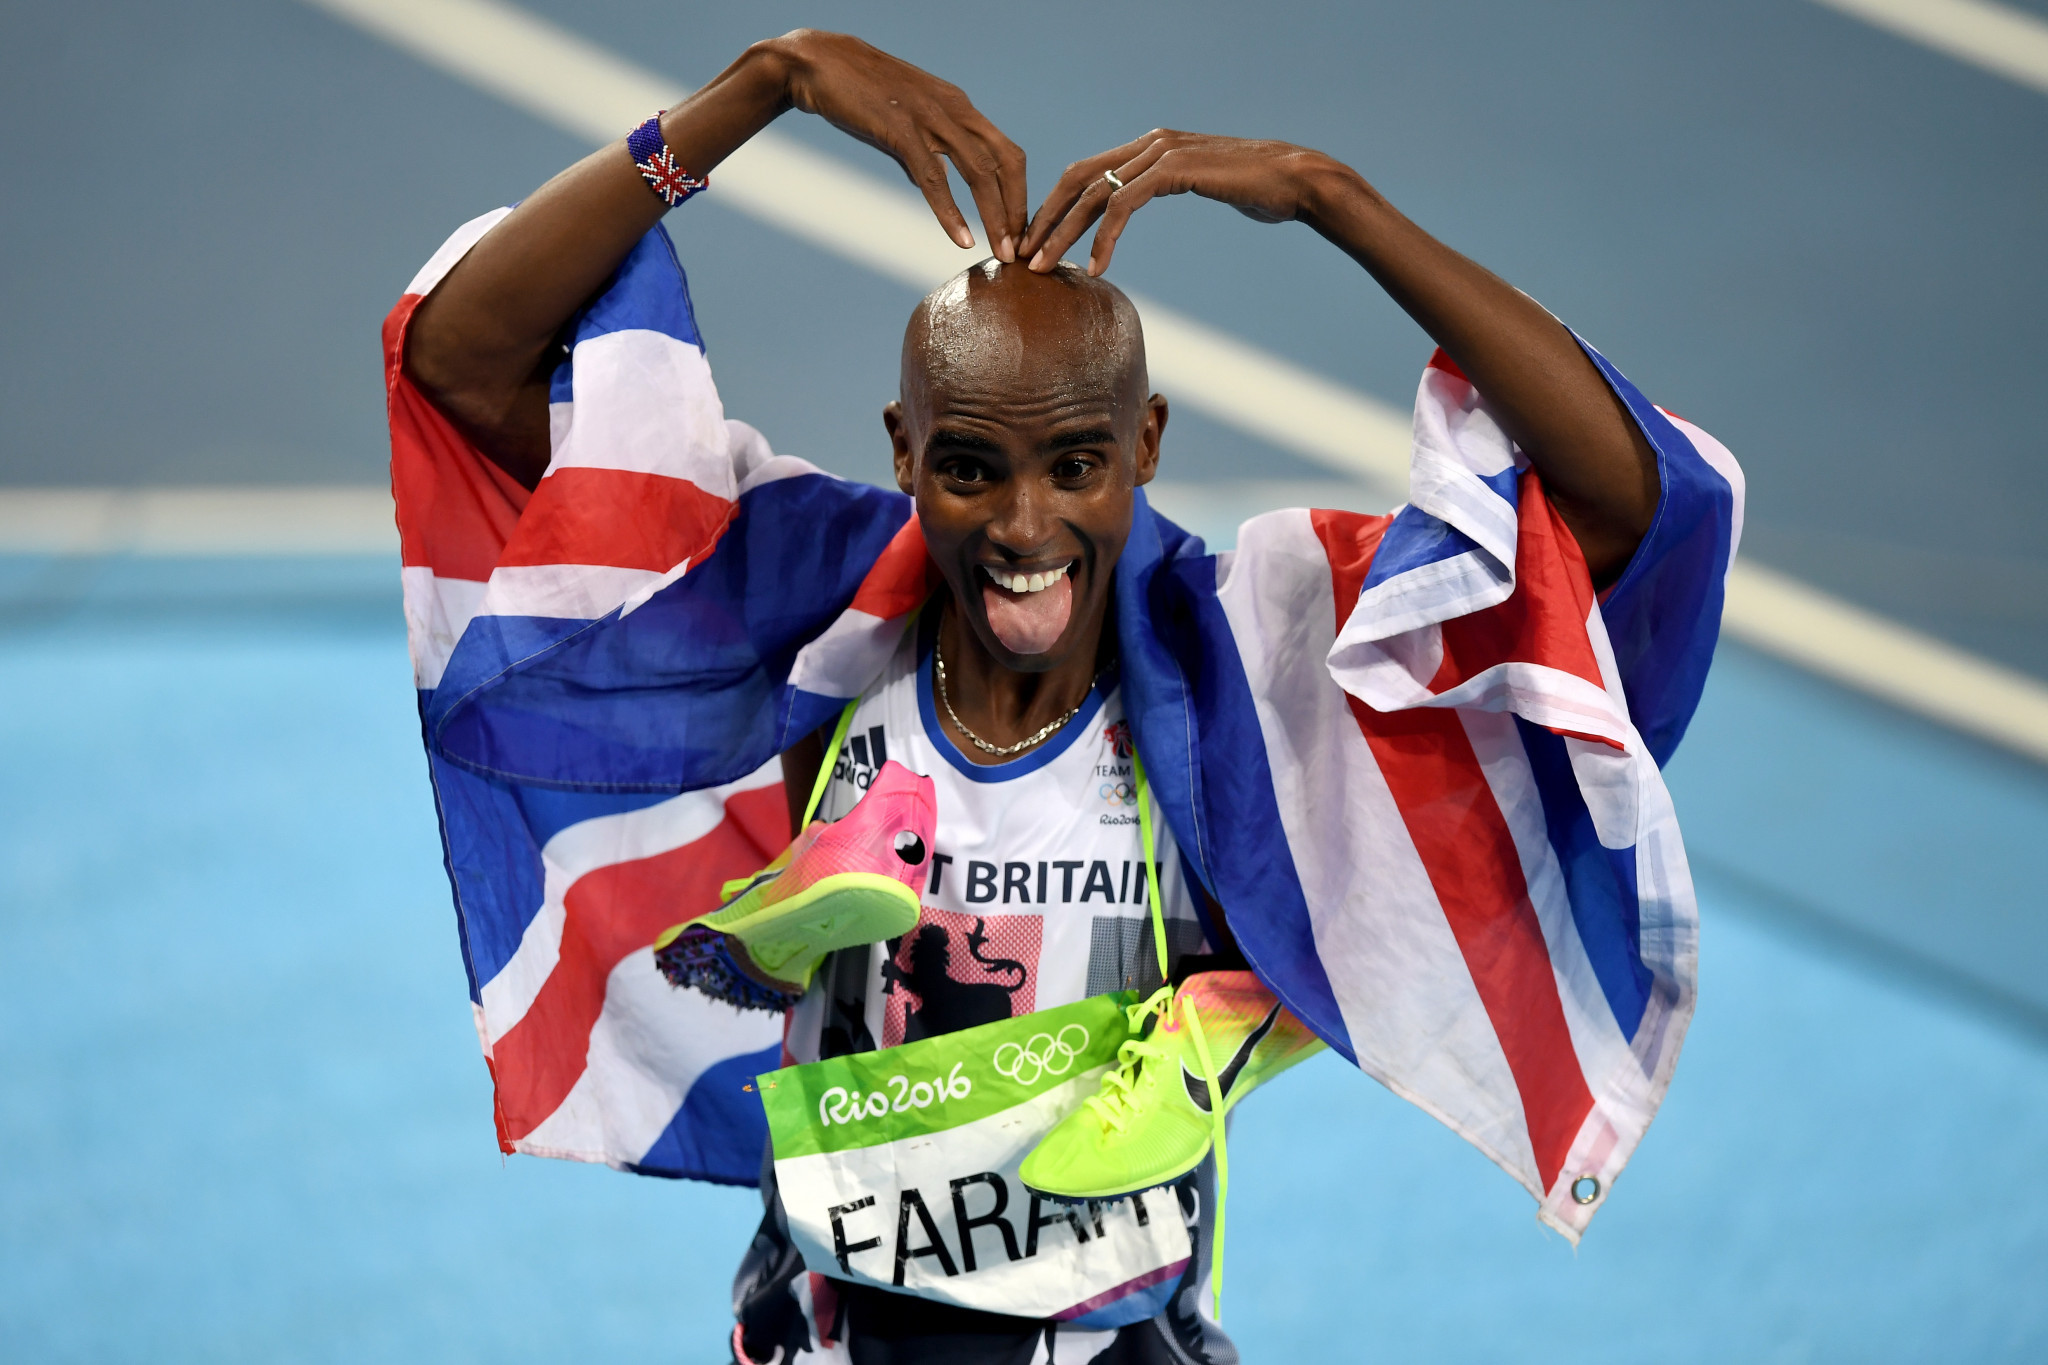 Sir Mo Farah earned two gold medals at the Rio 2016 Olympic Games, including in the 10,000m ©Getty Images 